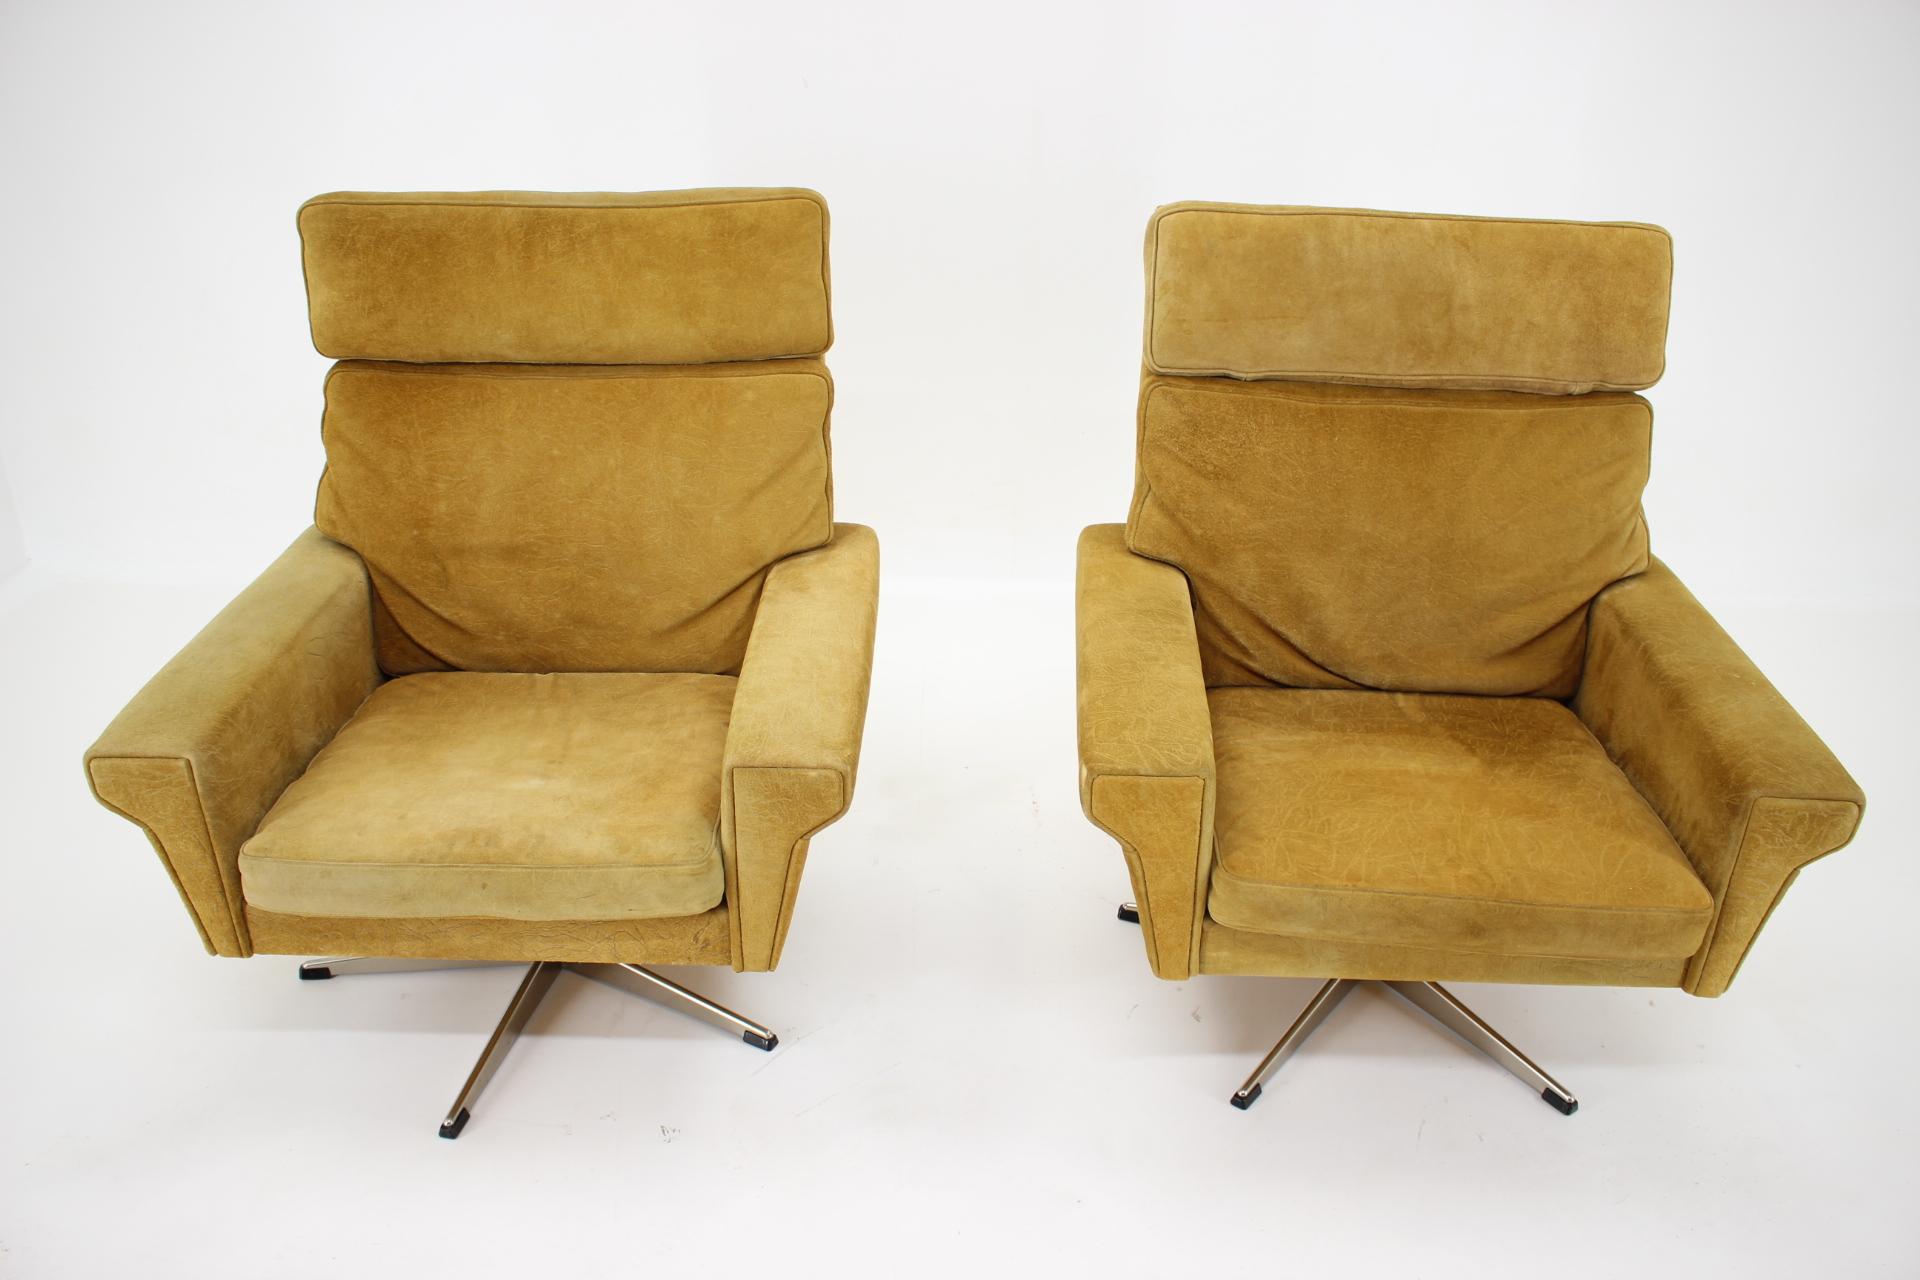 Danish 1970s Pair of Georg Thams Swivel Chairs in Suede Leather, Denmark